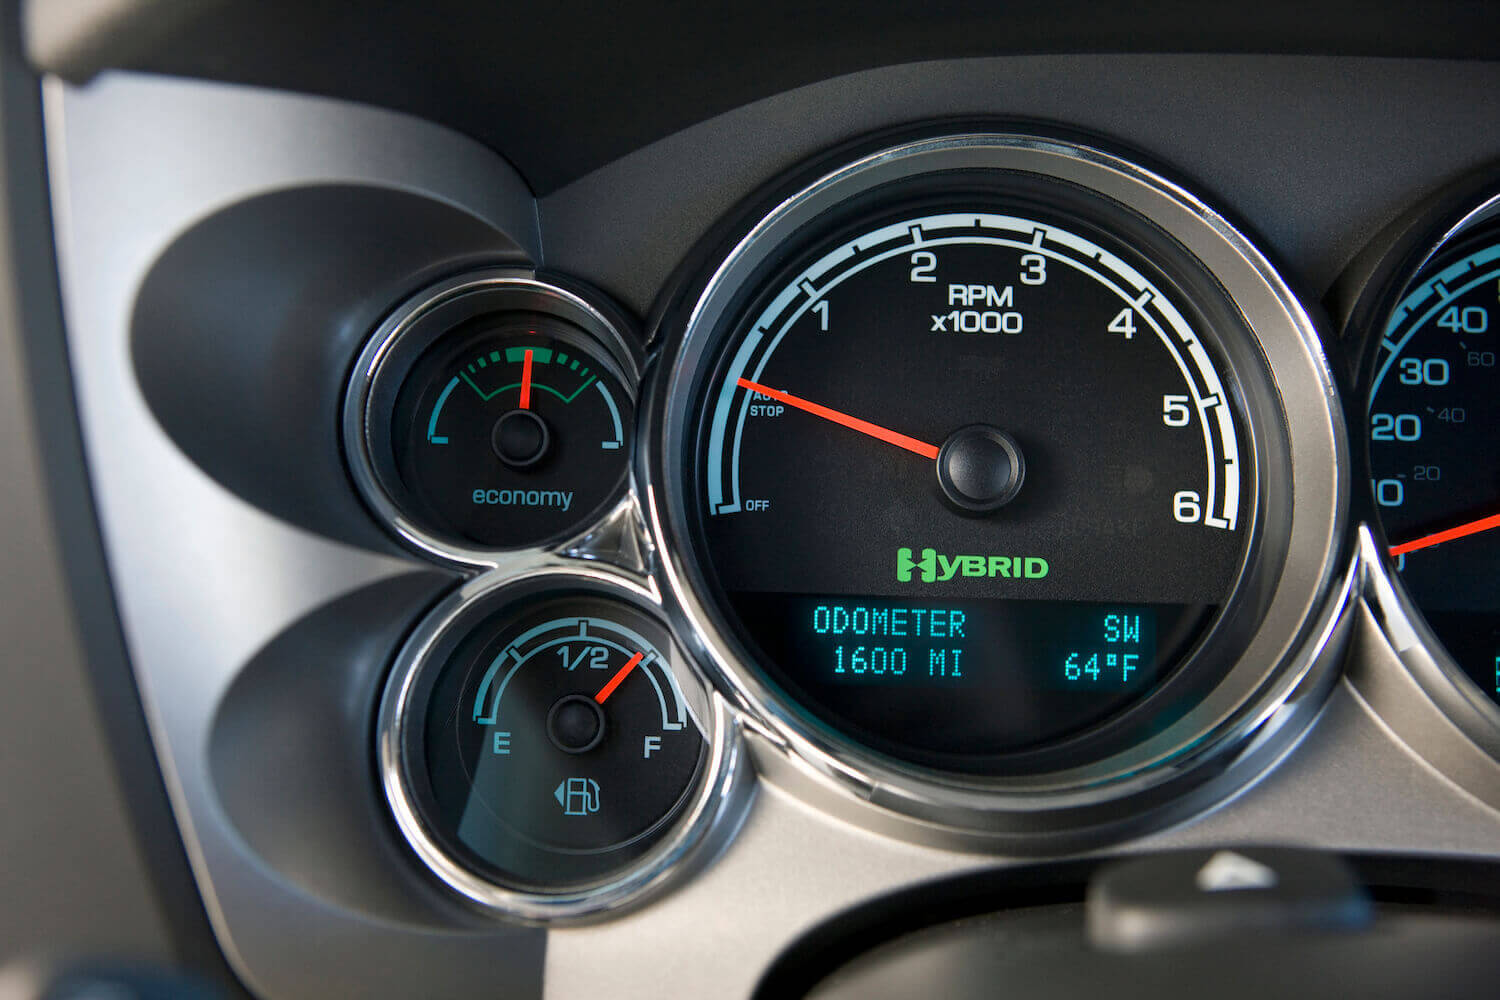 The Hybrid logo of the 2012 GMC Sierra being driven in "Eco" mode.